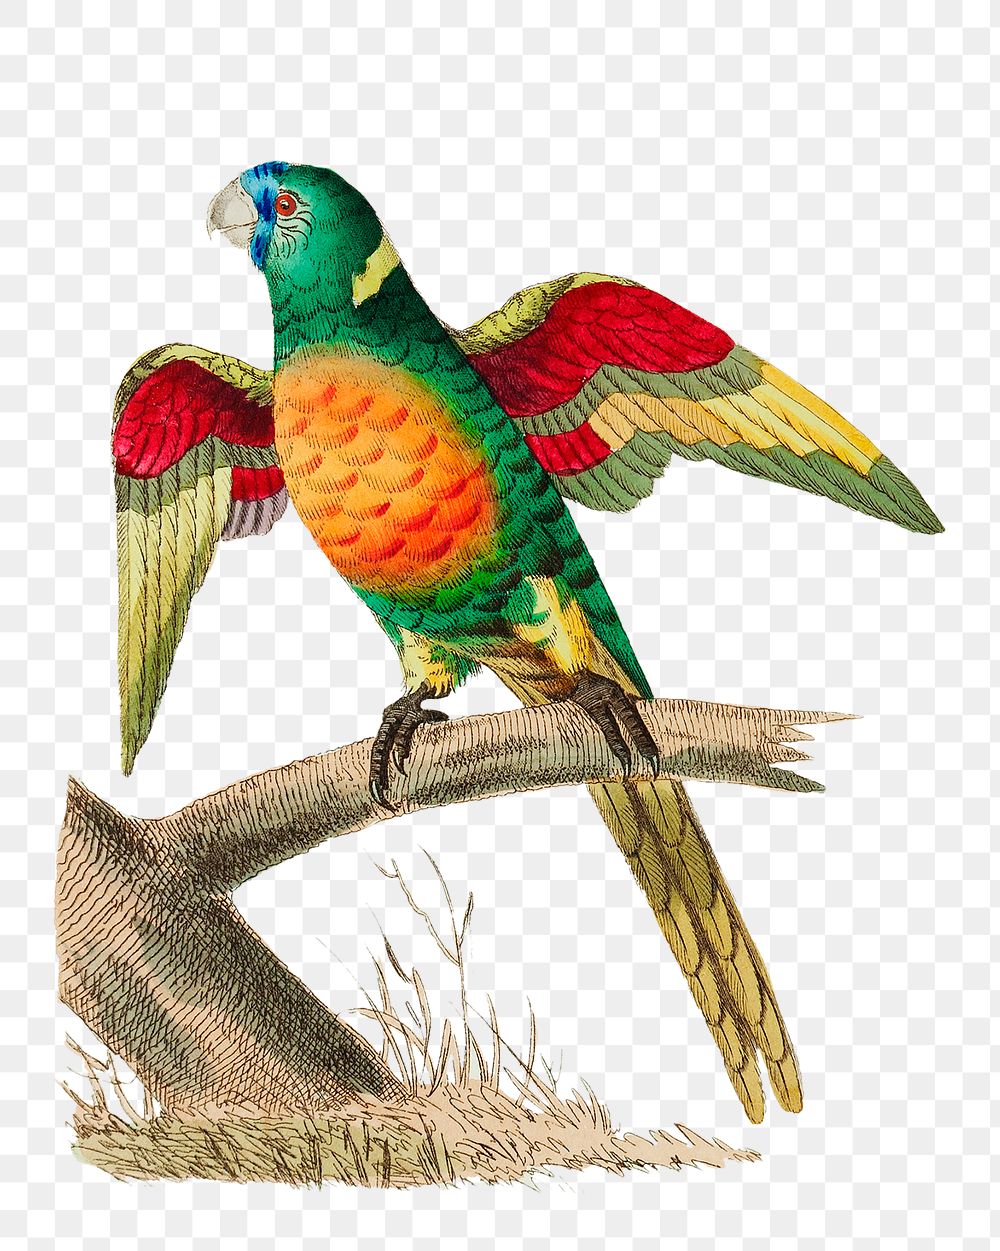 Png hand drawn bird long tailed green parrot illustration